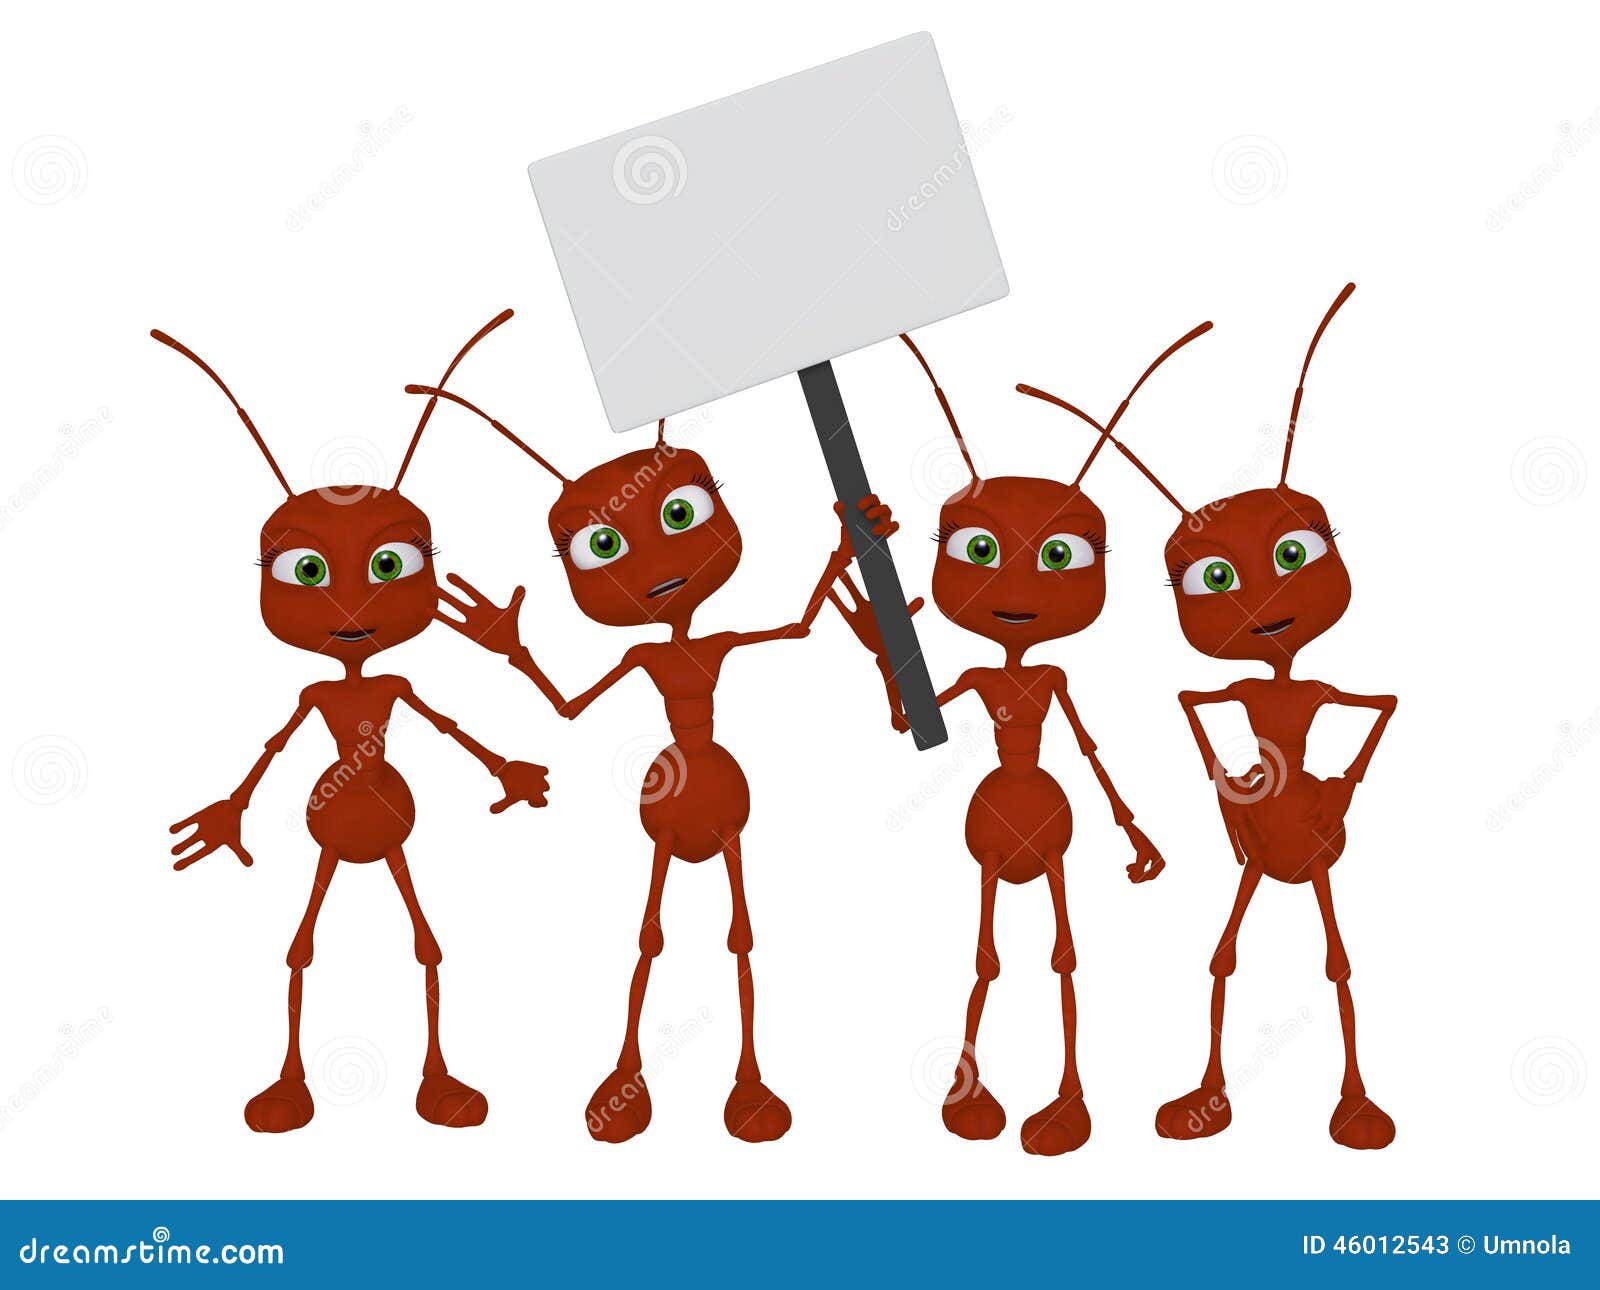 queen ant clipart - photo #42